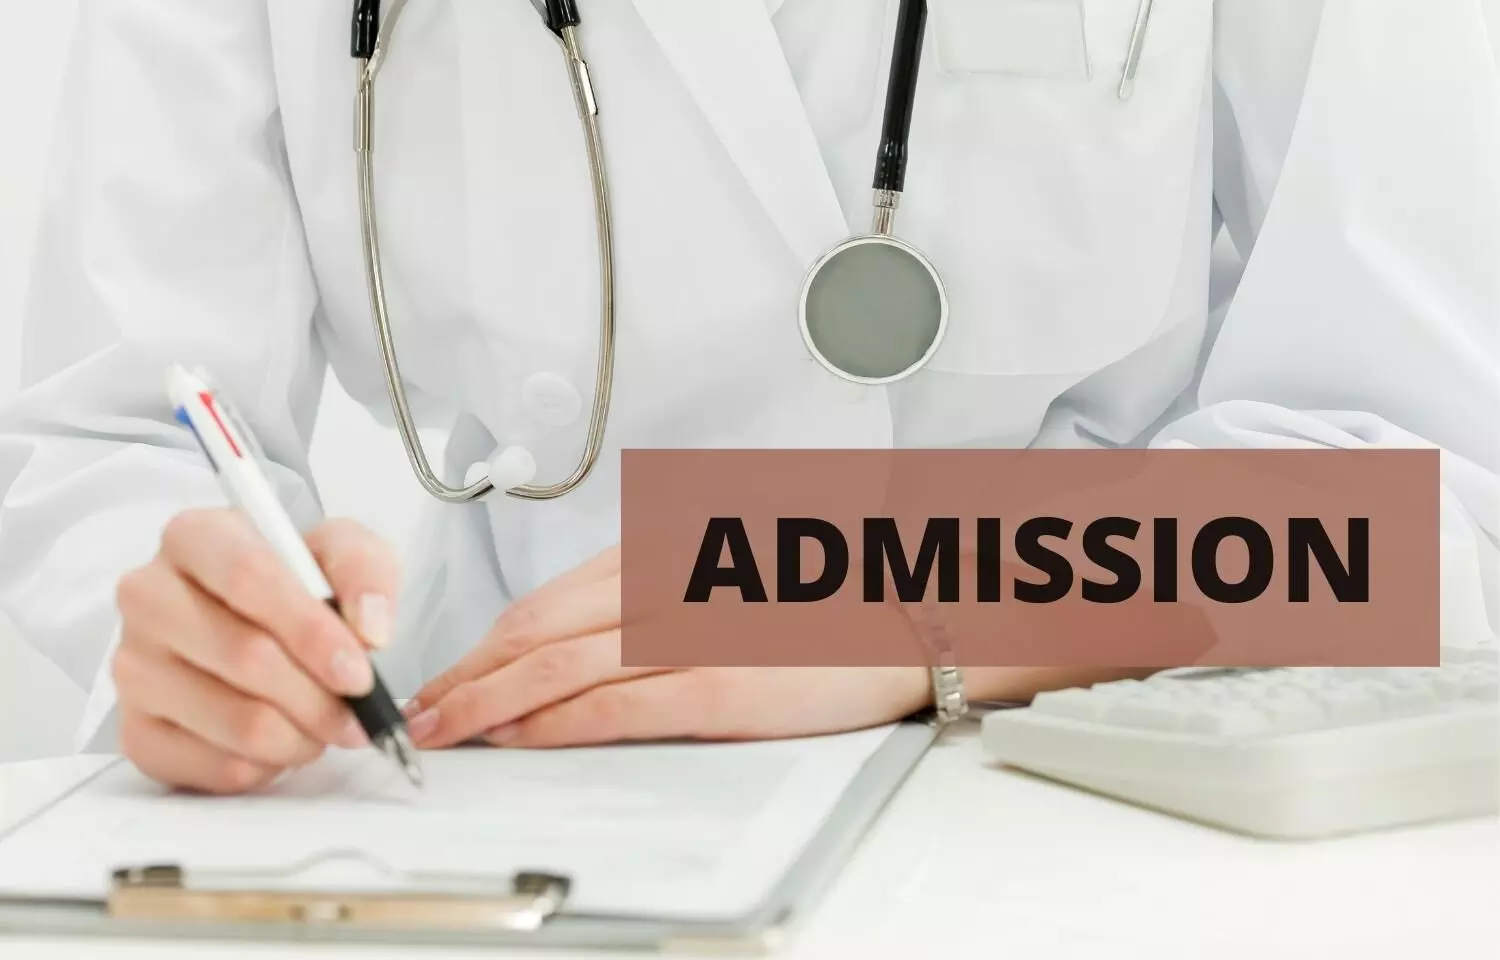 PG medical admissions 2021: Dr NTR University of Health Sciences notifies on web options, Check out schedule, fee details here